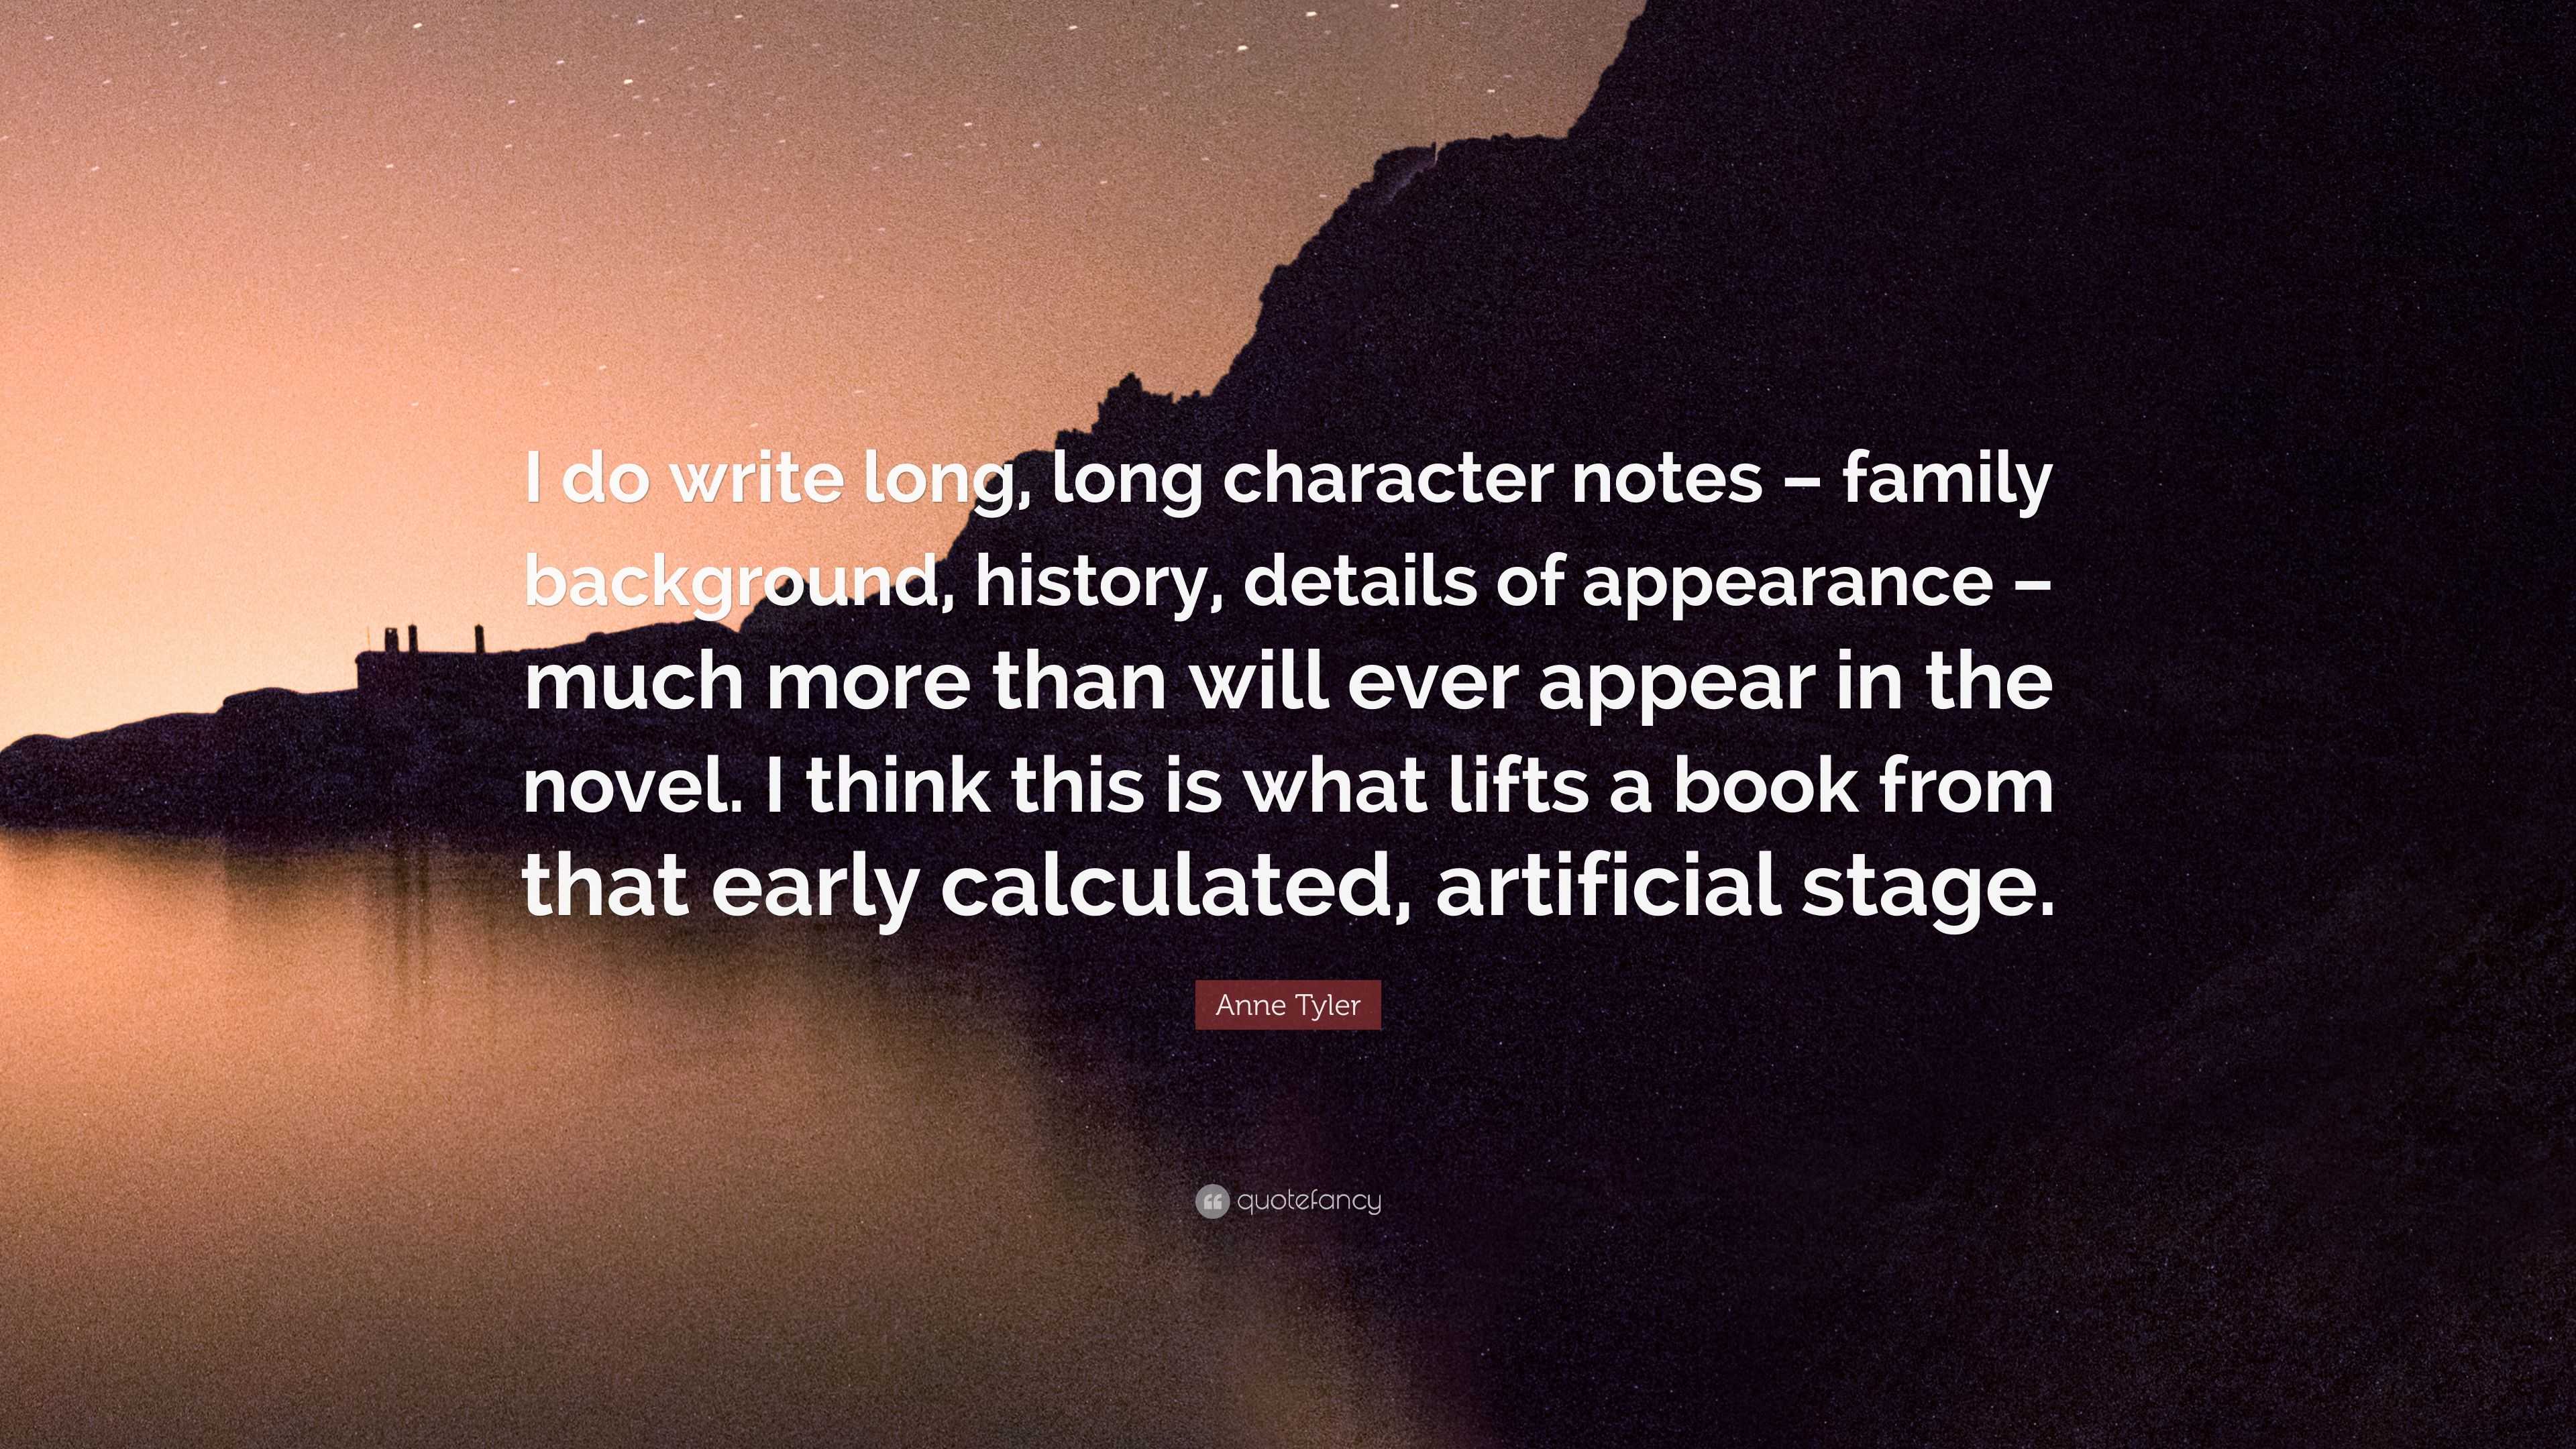 Anne Tyler Quote: “I do write long, long character notes – family background,  history, details of appearance – much more than will ever app...”